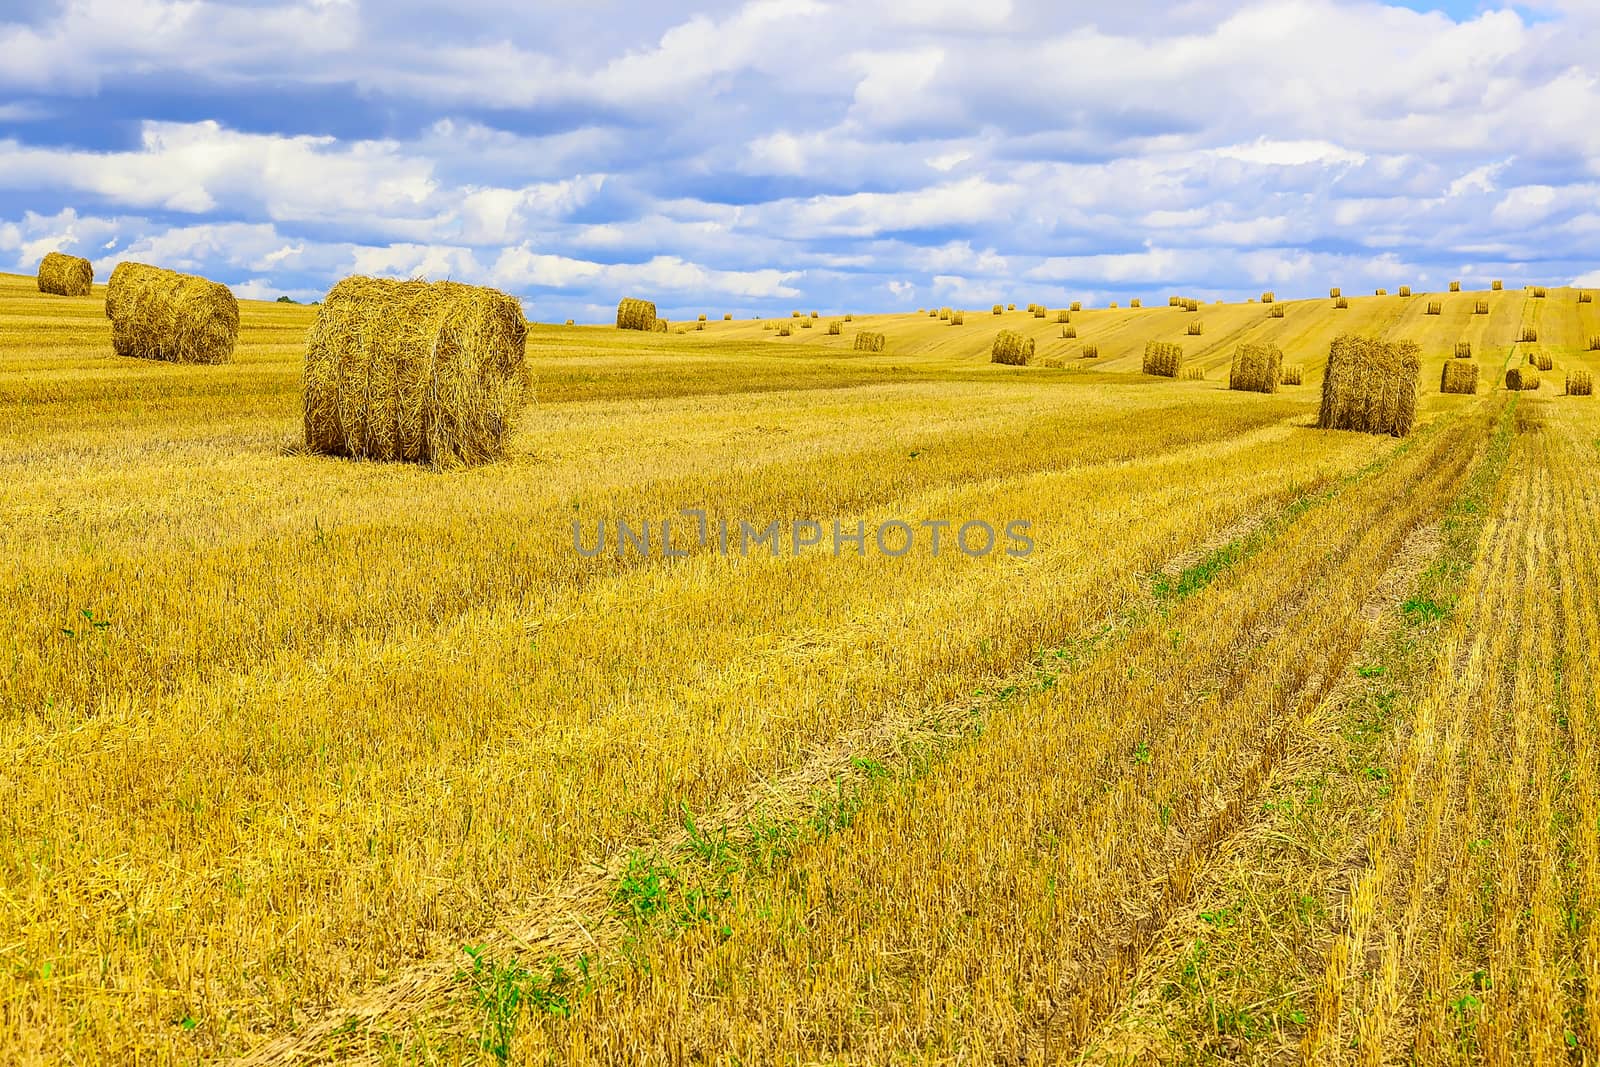 Yellow, Round Straw Bales in a  Field at end of Summer at Day with Blue Sky, Clouds after Harvest